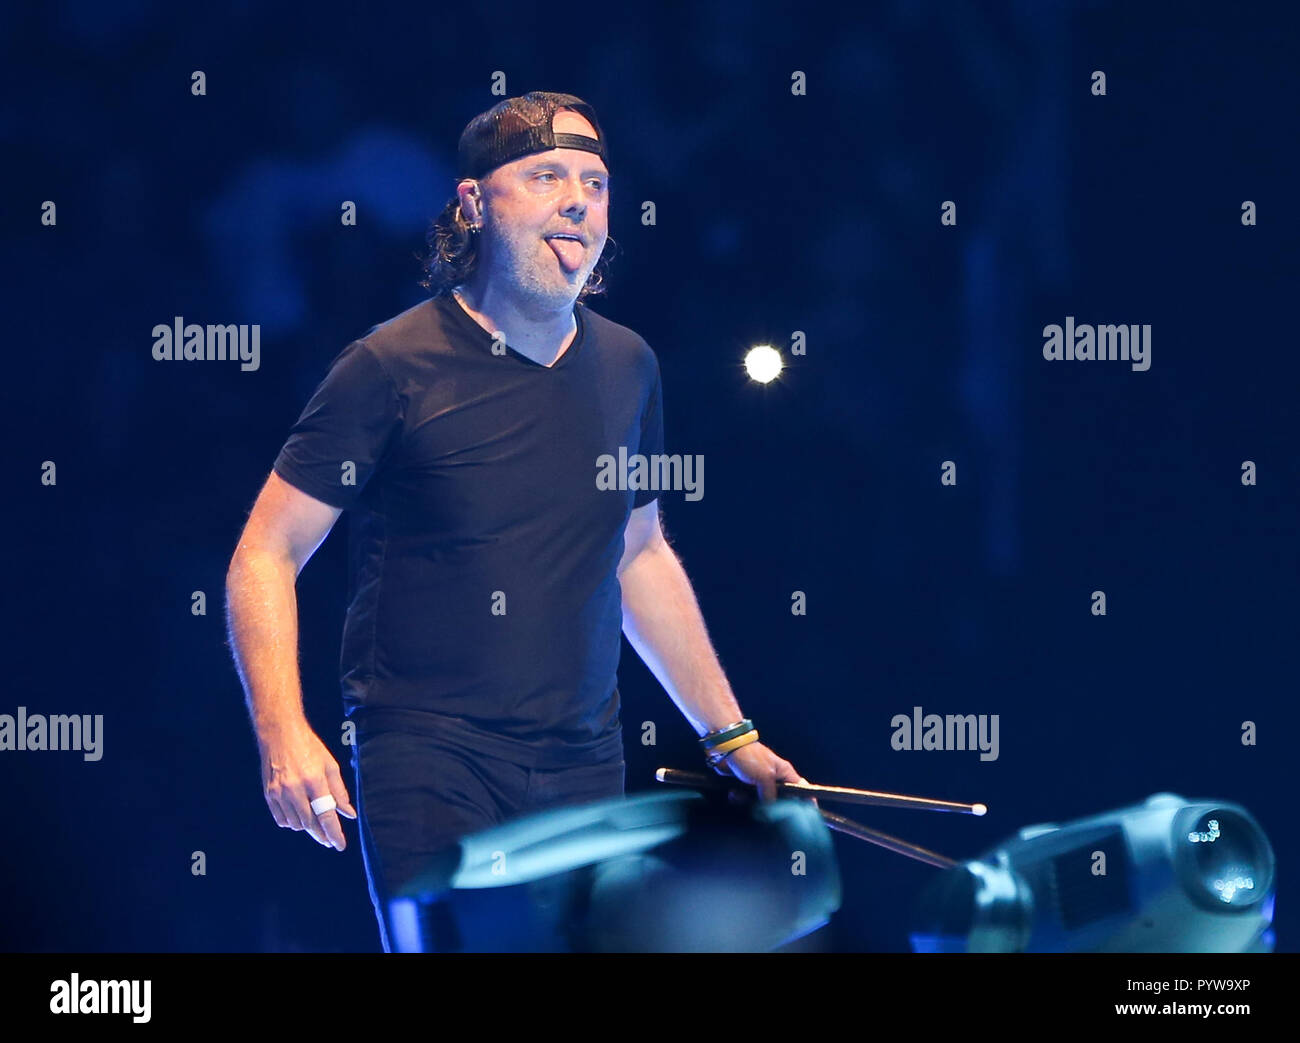 Albany, New York, USA. 29th October, 2018. Lars Ulrich of Metallica performs in concert at Times Union Center on October 29, 2018 in Albany, New York. Credit: Debby Wong/Alamy Live News Stock Photo